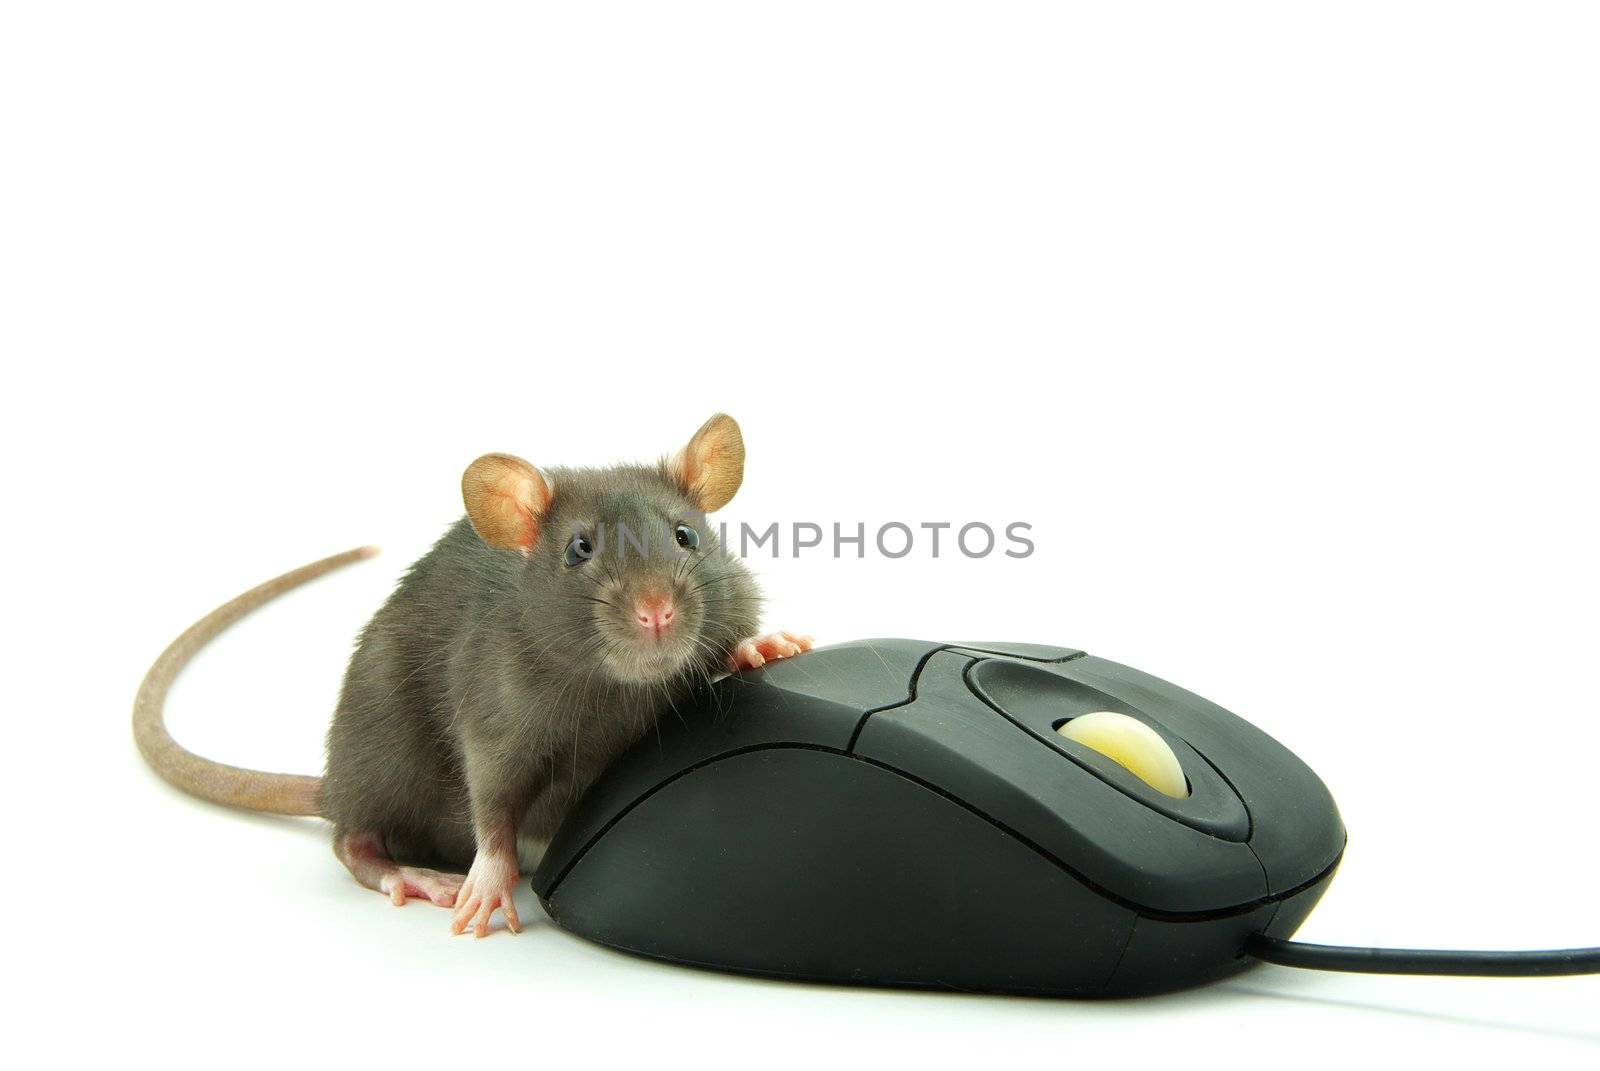 rat and  computer mouse  by Pakhnyushchyy